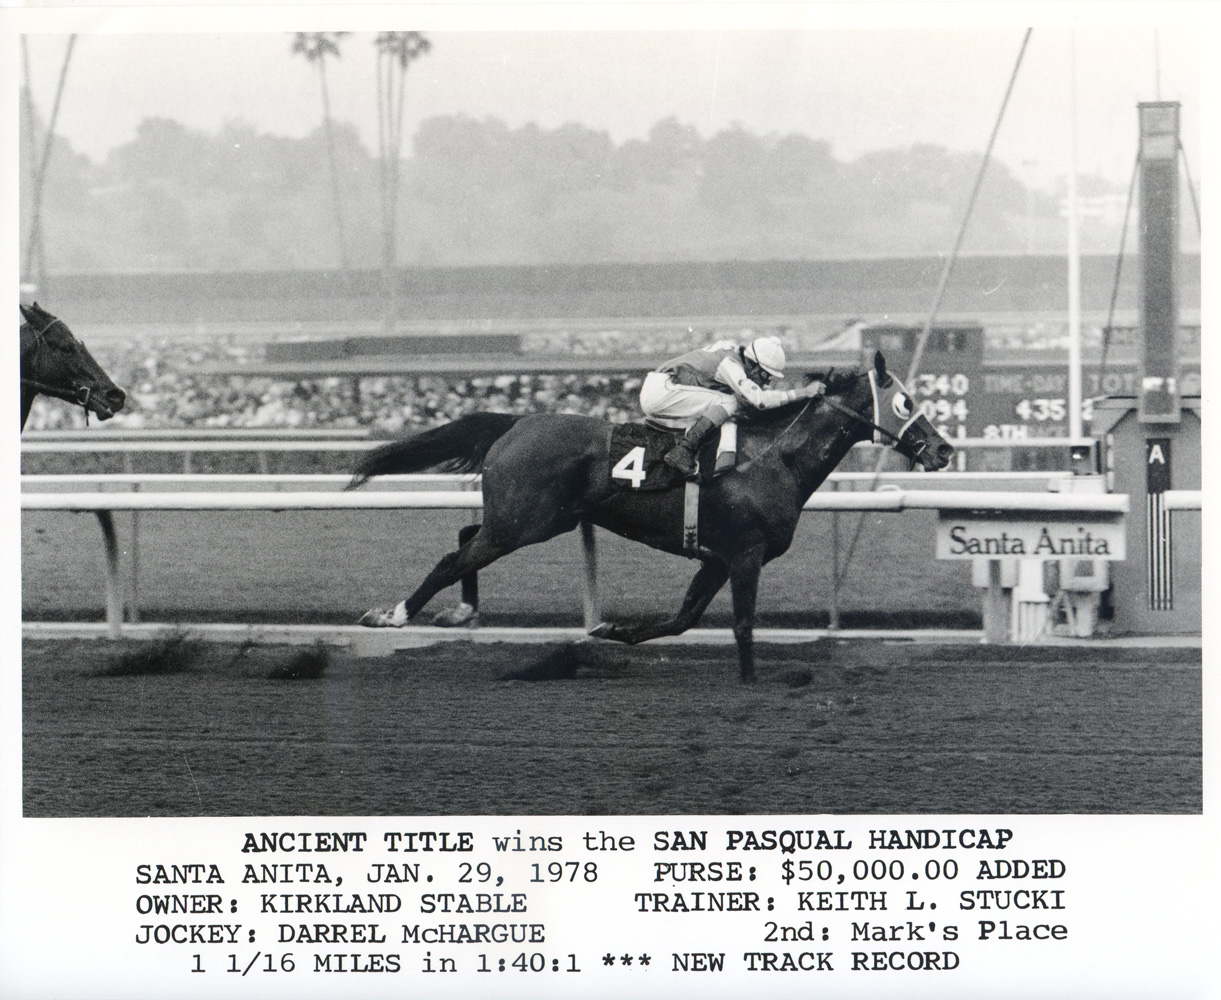 Darrel McHargue and Ancient Title winning the 1978 San Pasqual Handicap at Santa Anita and setting a new track record (Bill Mochon/Museum Collection)